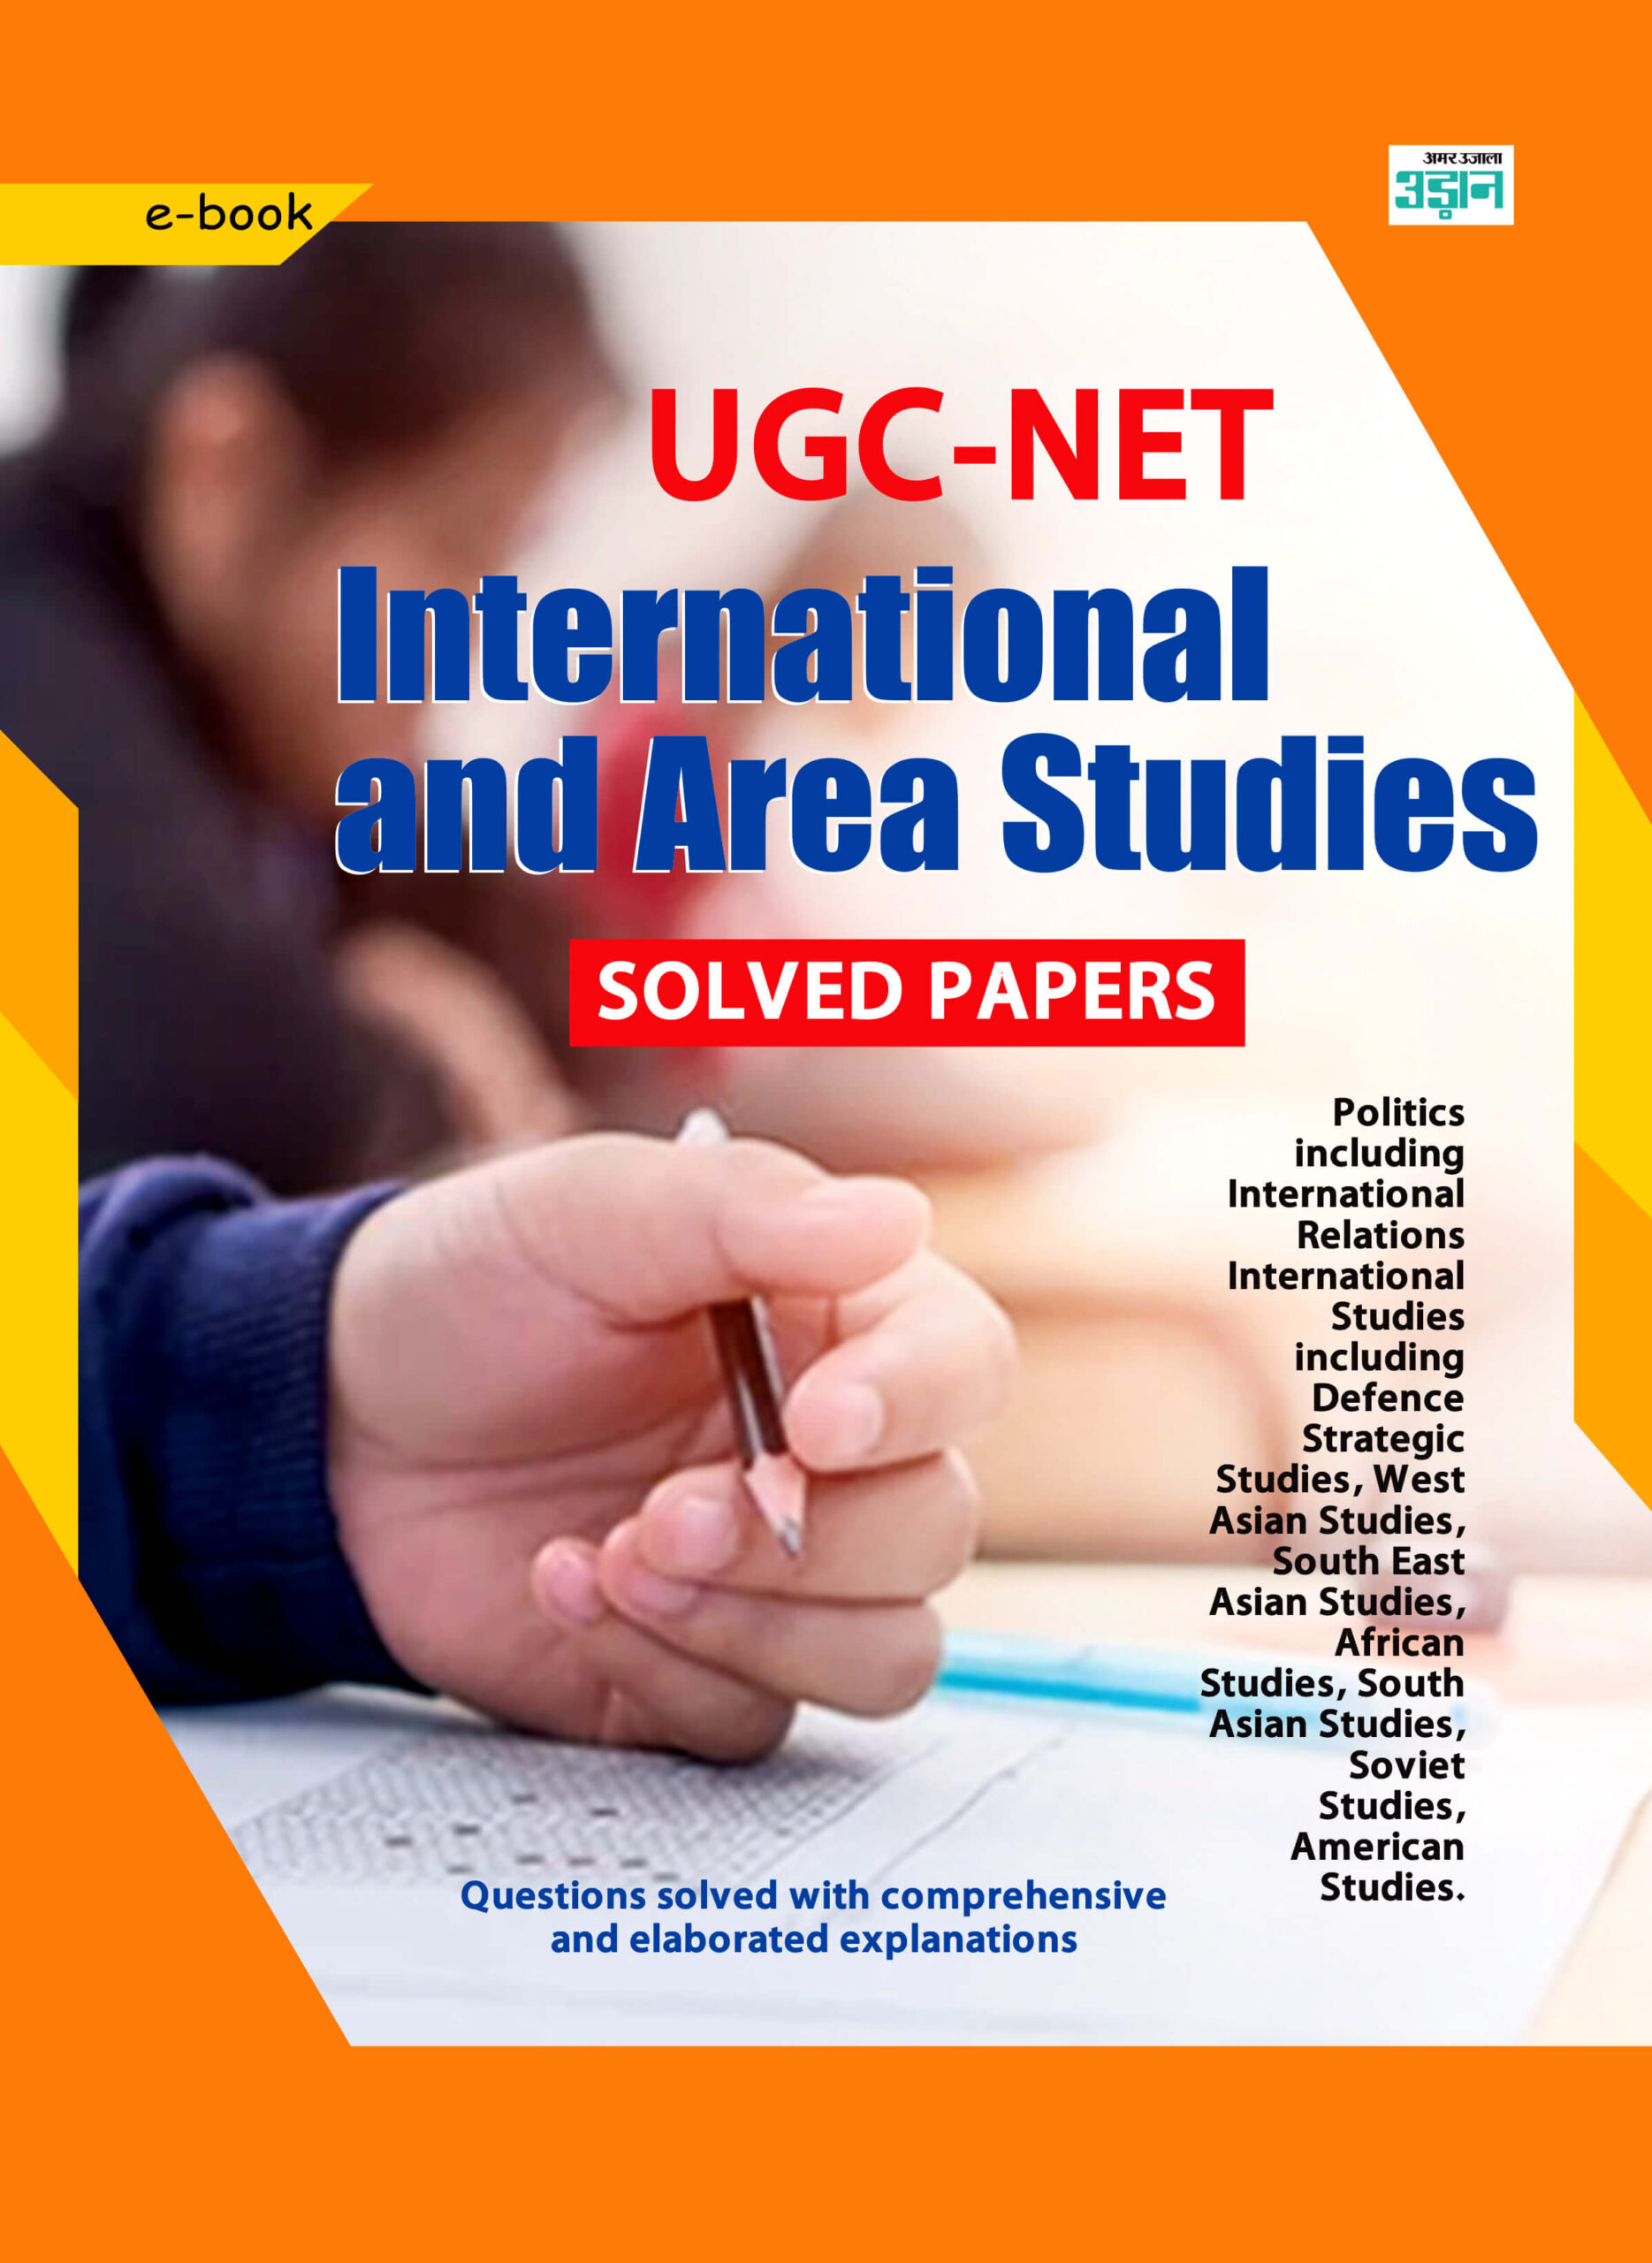 UGC-NET International and Area Studies Solved Papers (English)